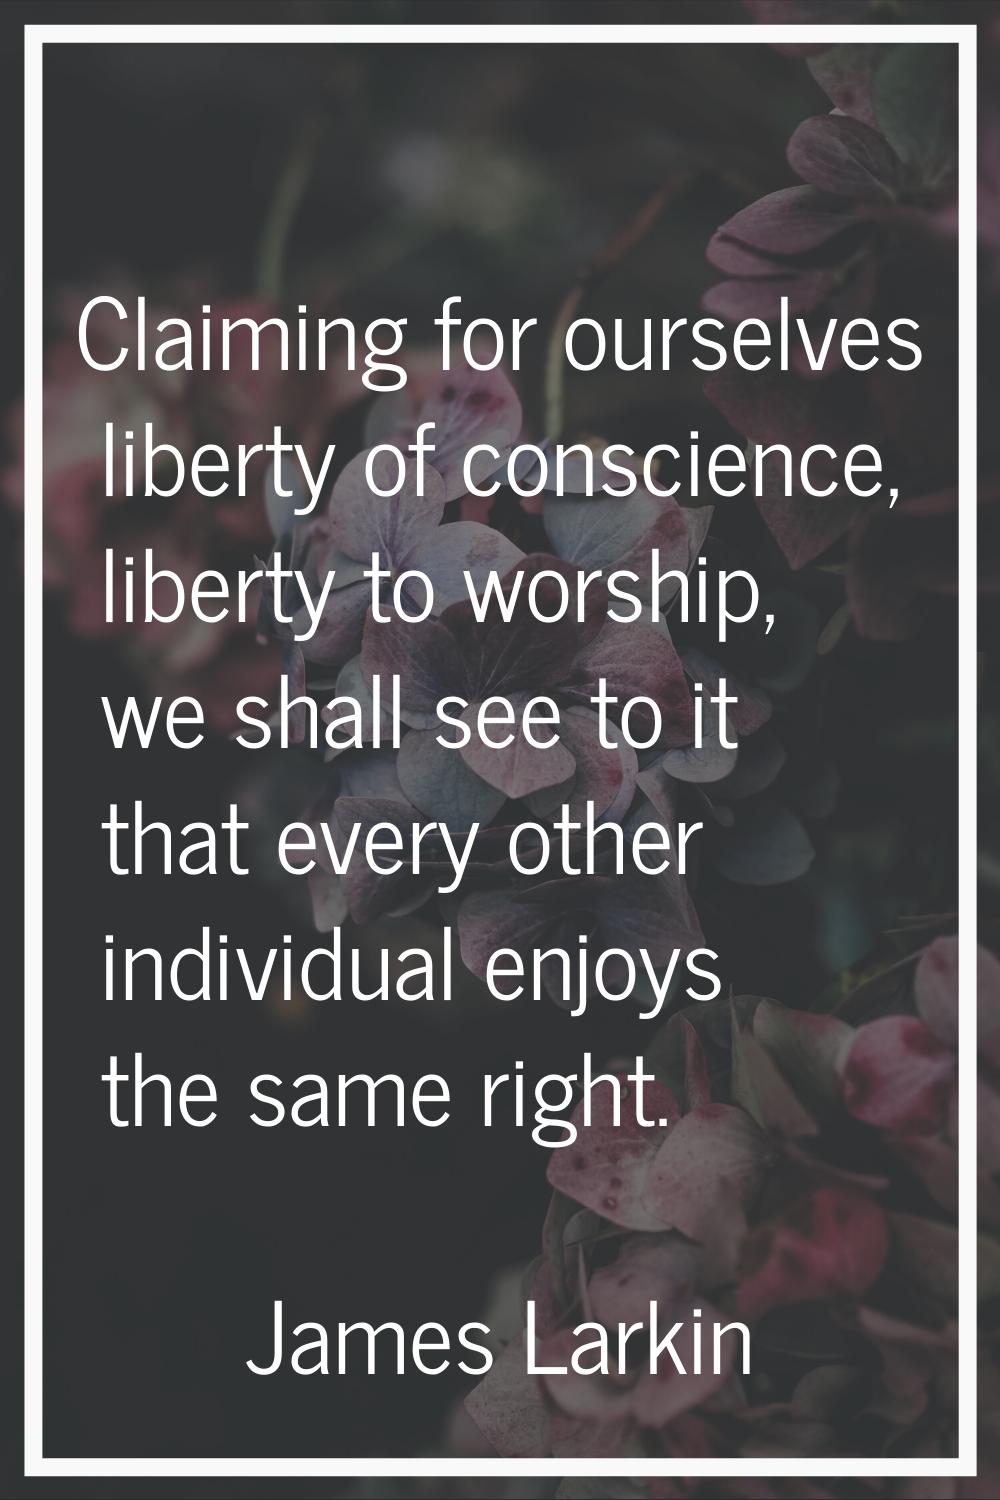 Claiming for ourselves liberty of conscience, liberty to worship, we shall see to it that every oth